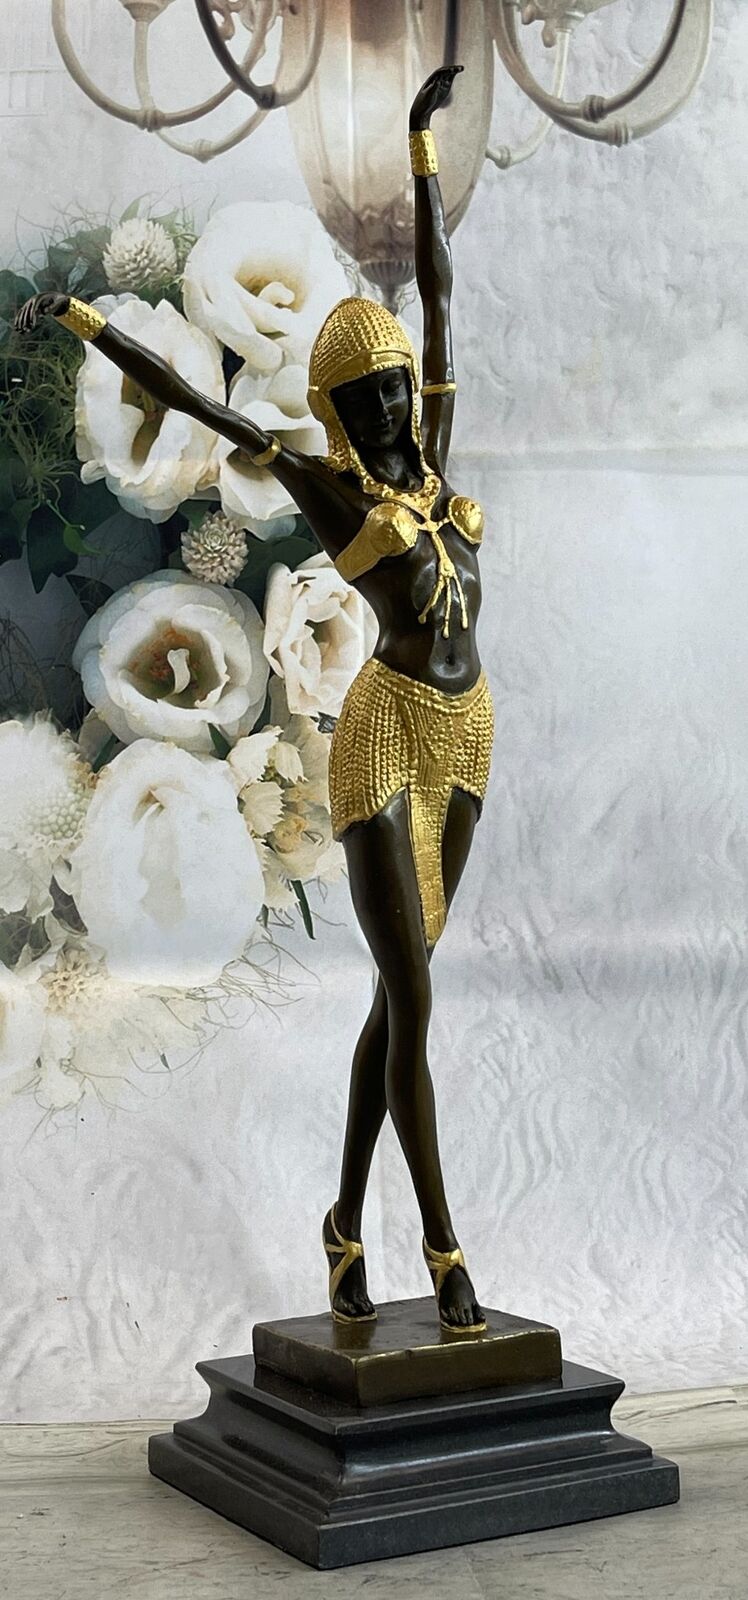 Signed Gold Patina Tall Chiparus Lady Bronze Sculpture on Marble Base Figure Art